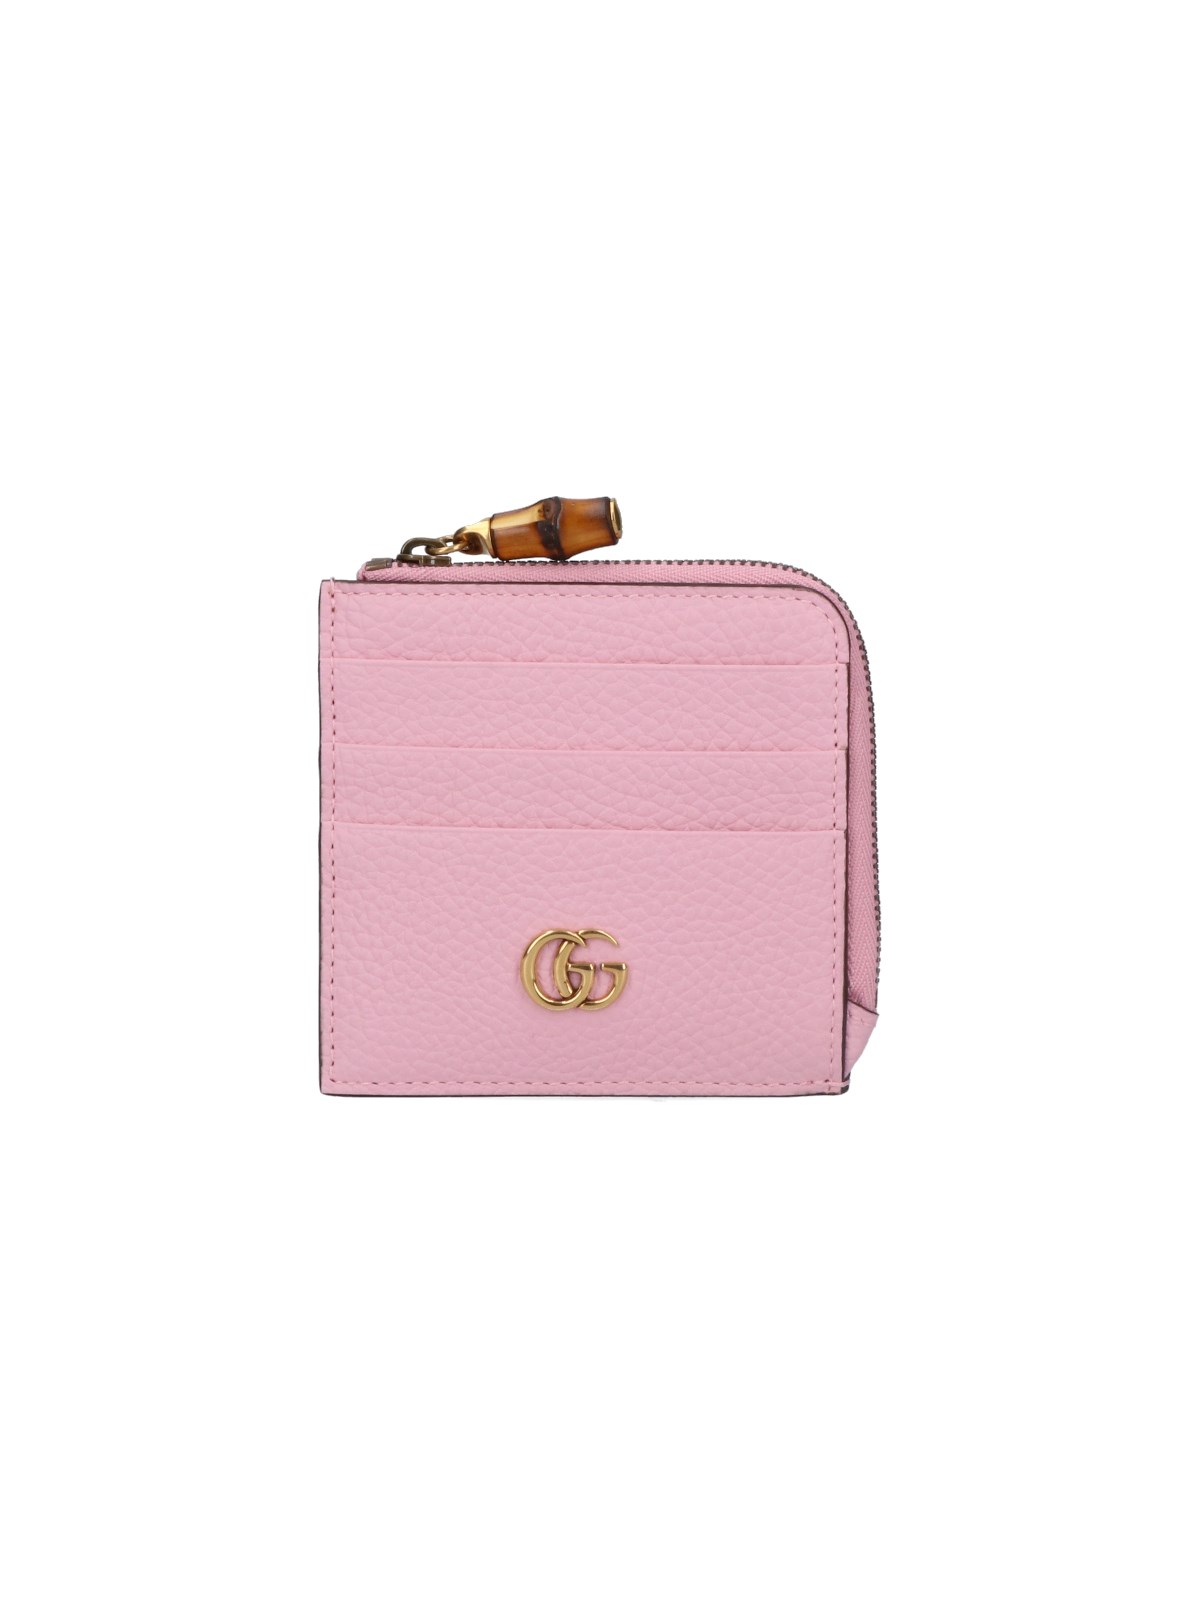 Gucci `bamboo Puller` Card Case In Rosa